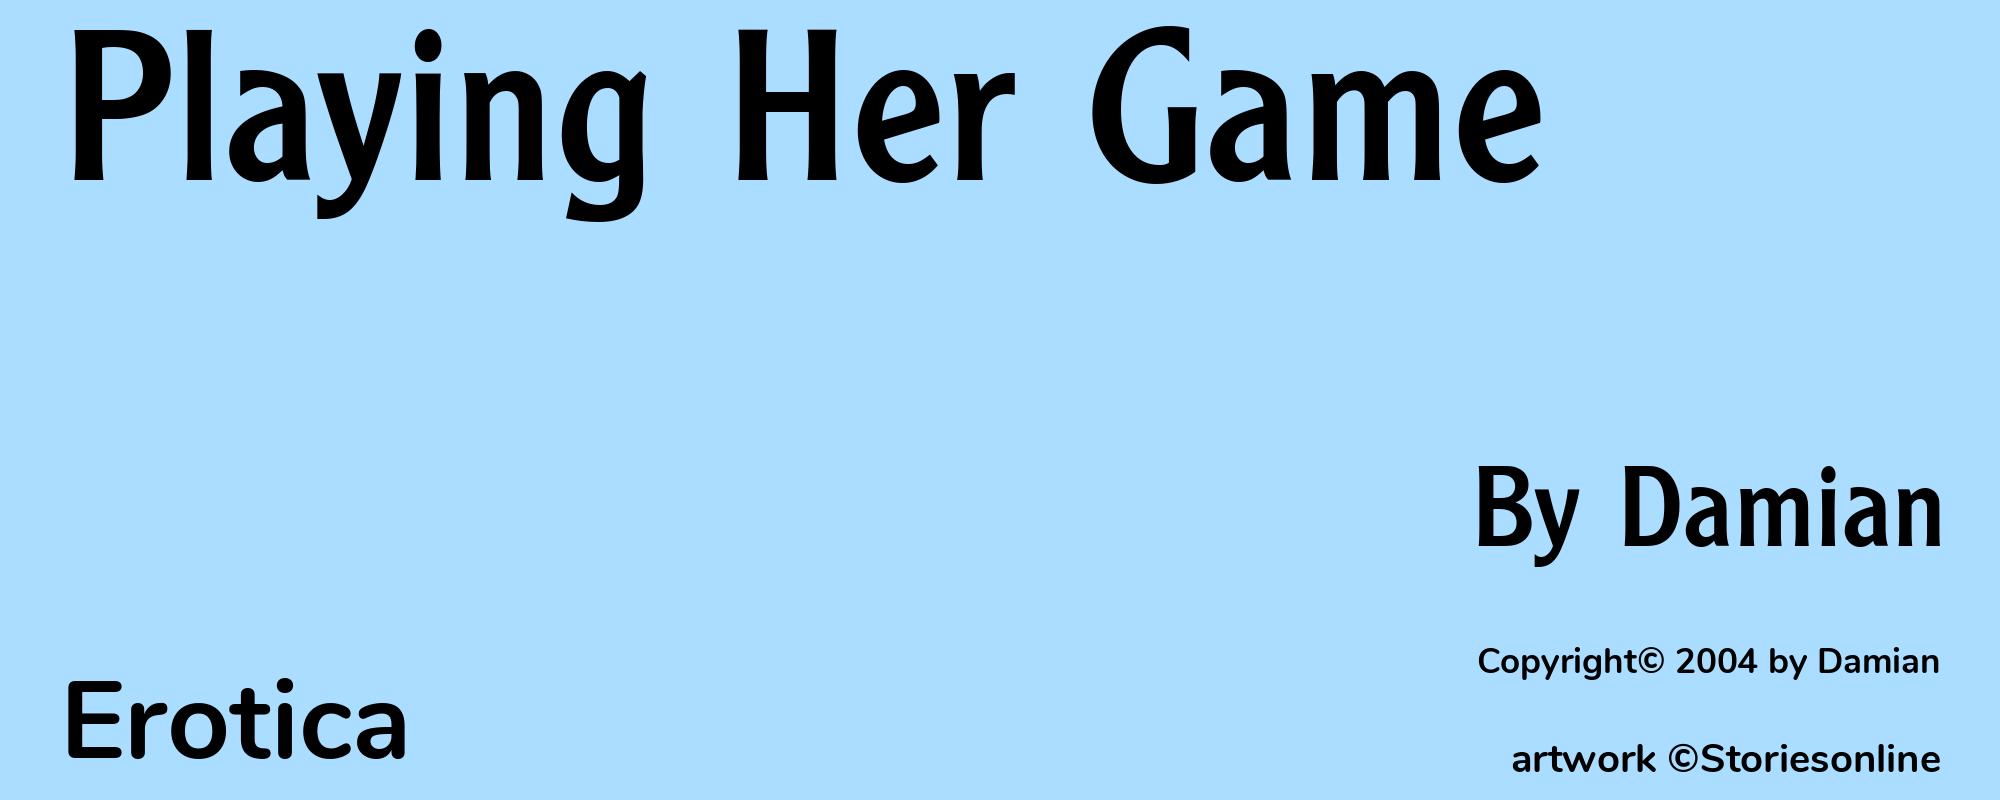 Playing Her Game - Cover